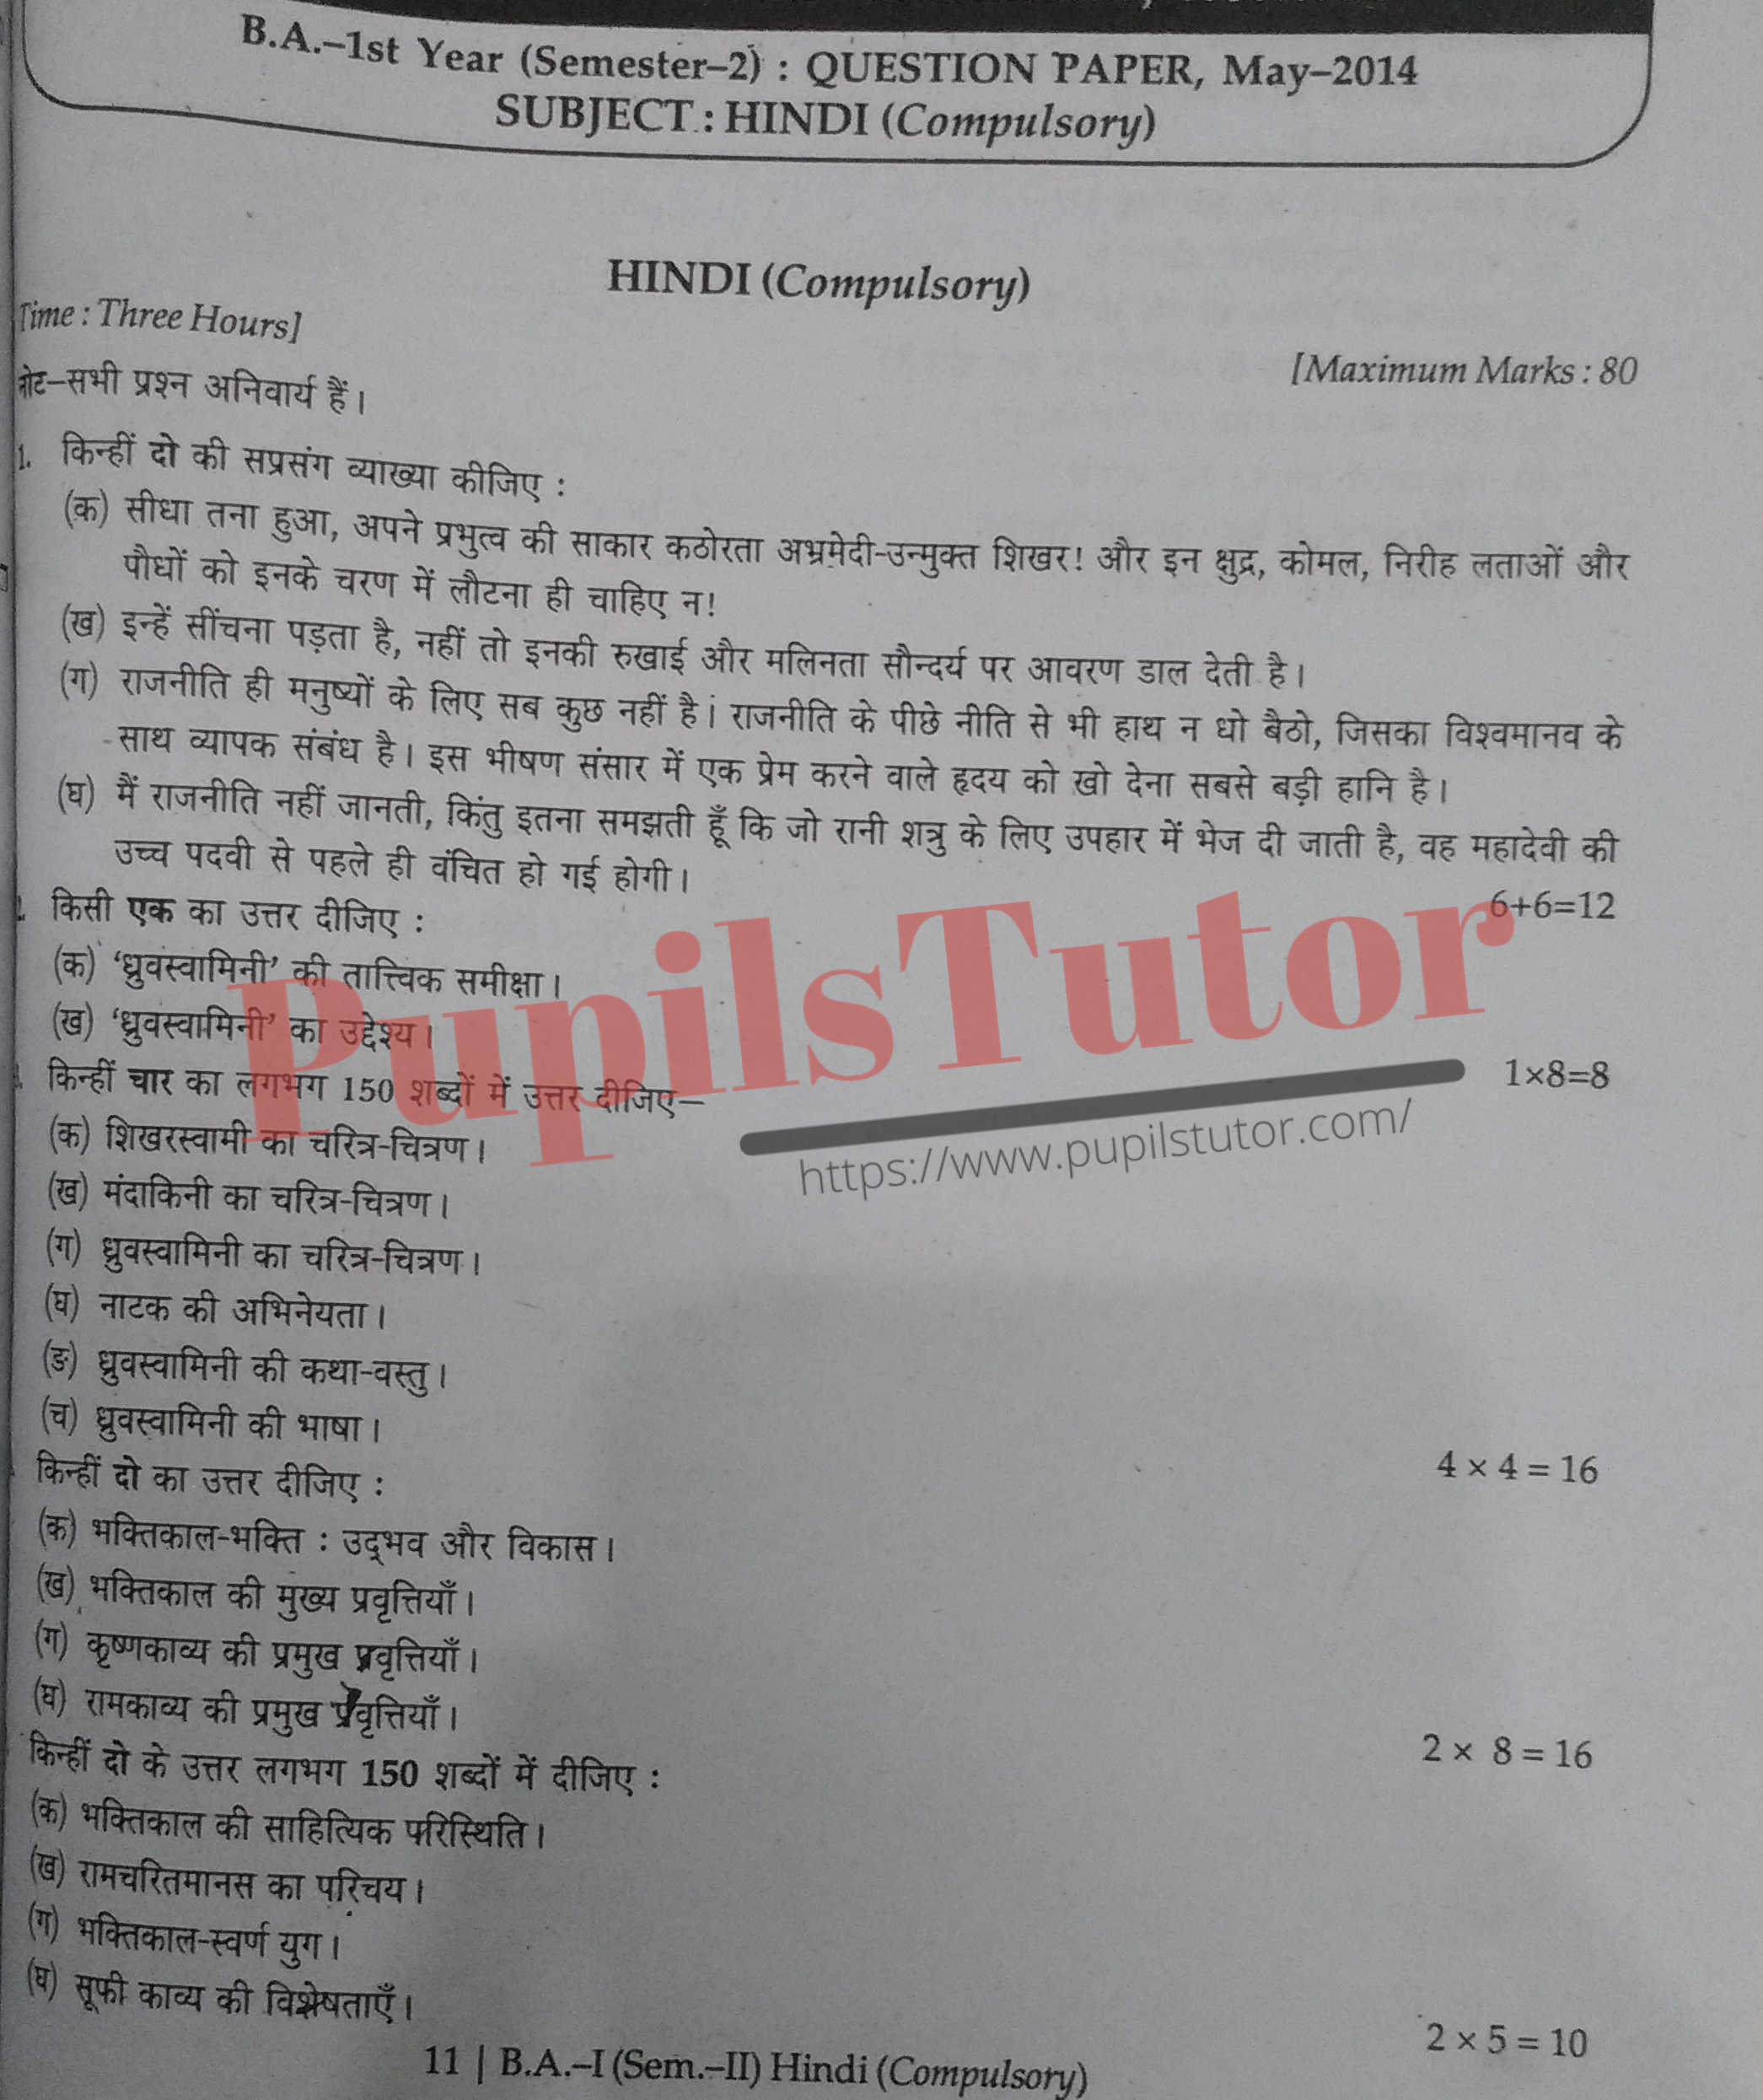 MDU (Maharshi Dayanand University, Rohtak Haryana) BA Regular Exam Second Semester Previous Year Hindi Question Paper For May, 2014 Exam (Question Paper Page 1) - pupilstutor.com